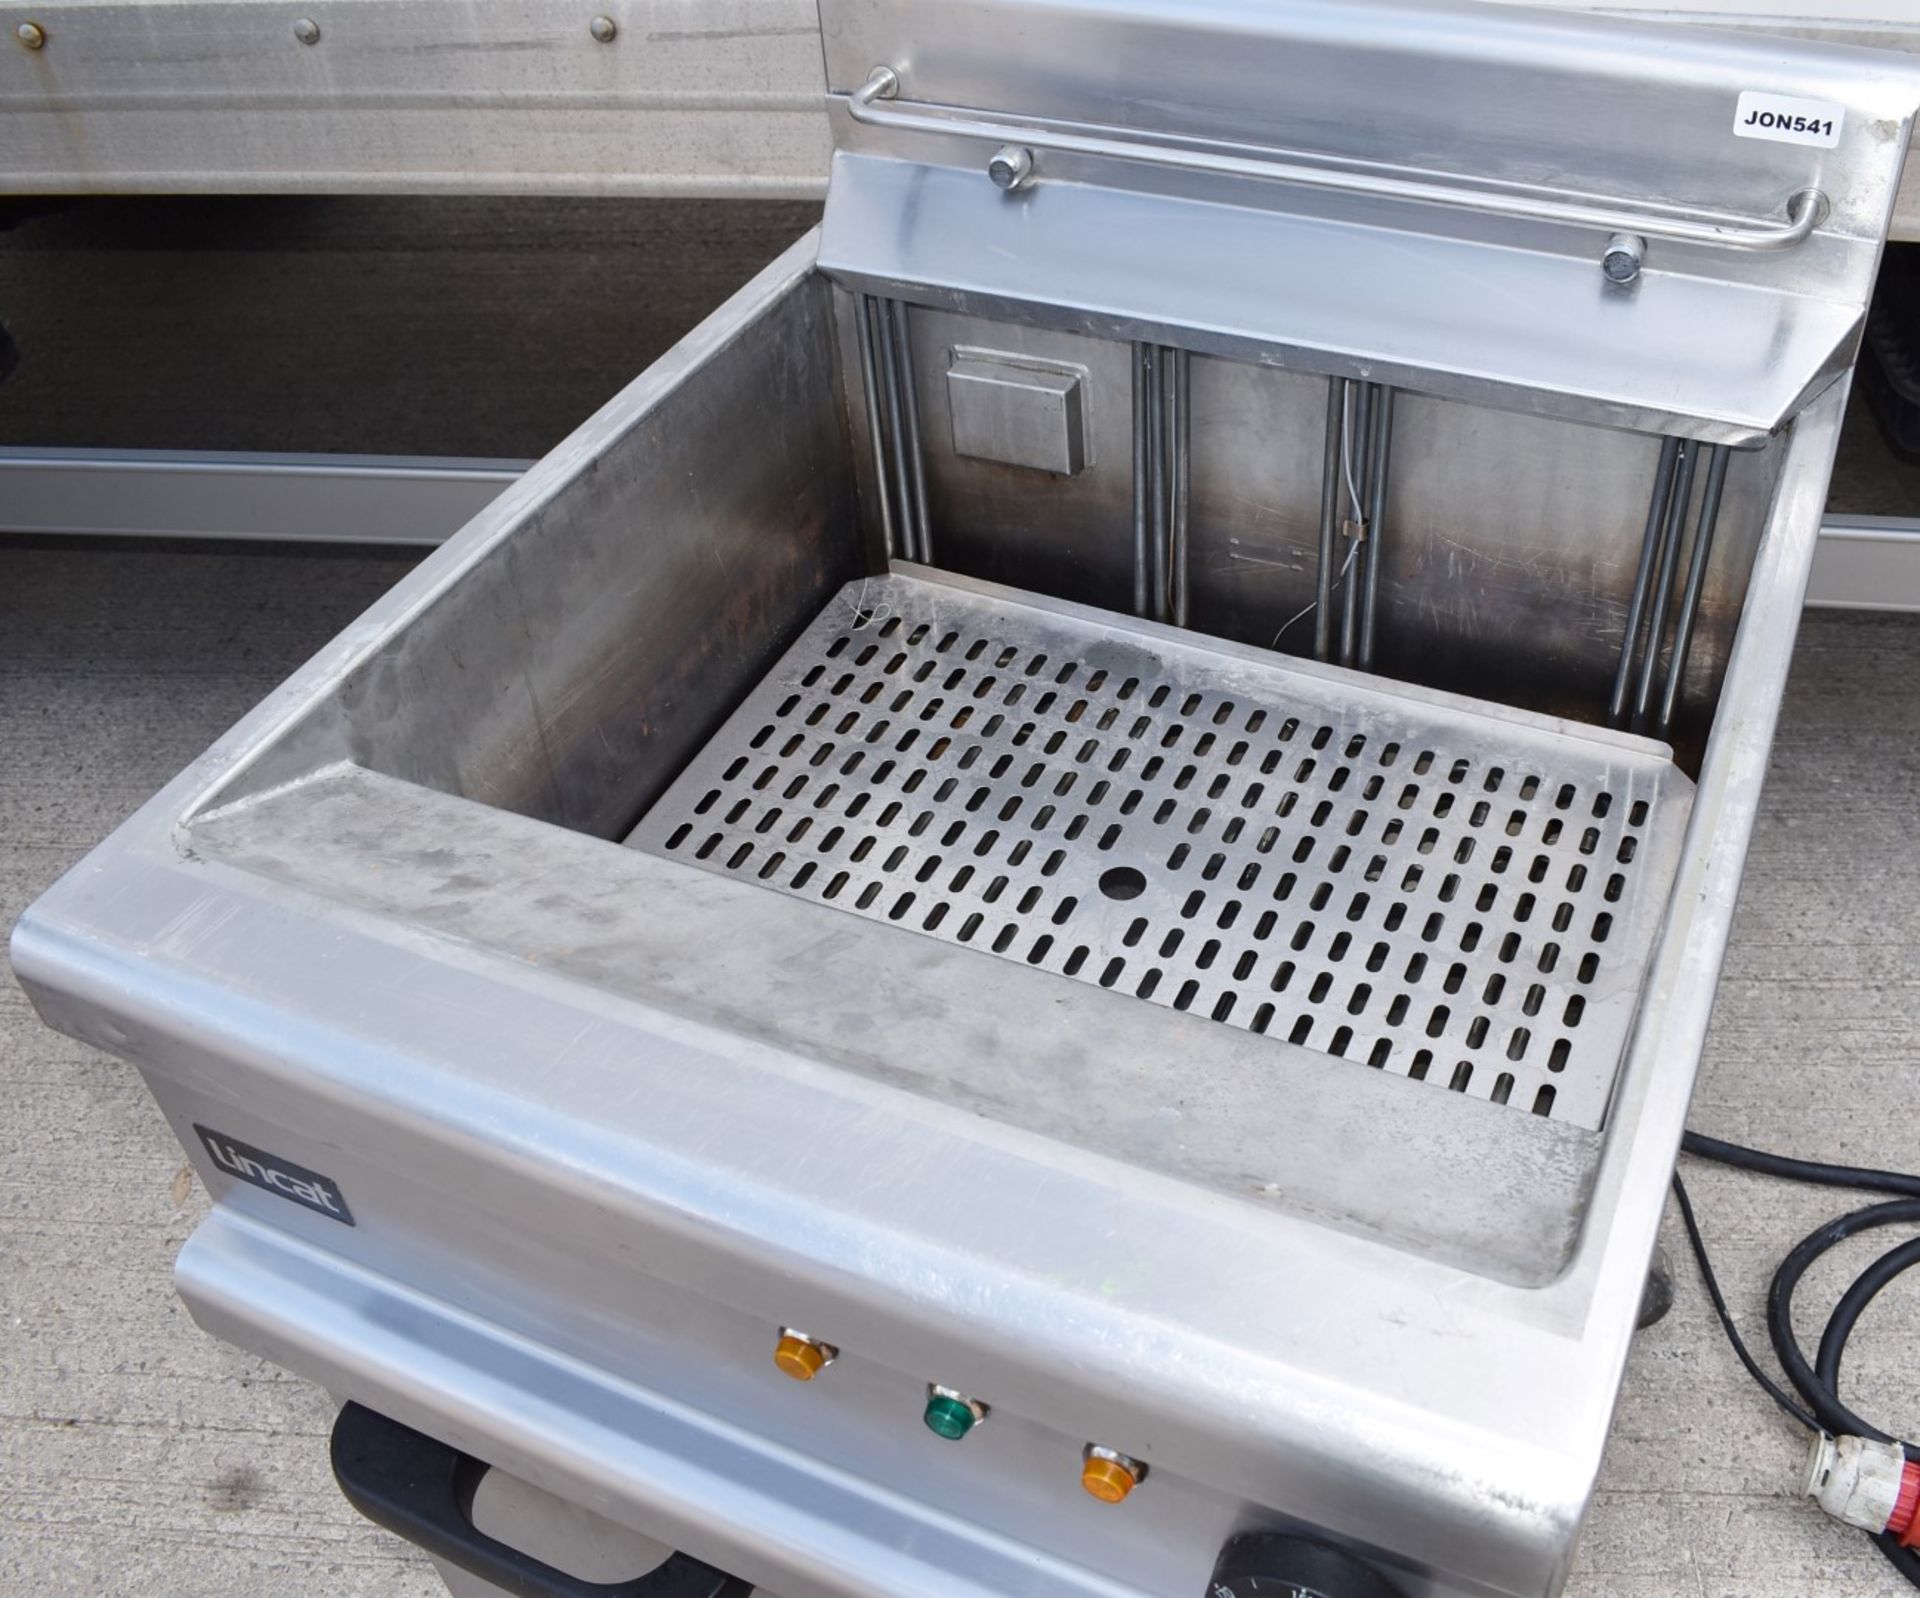 1 x Lincat Opus OE7108 Single Tank Electric Fryer With Filteration - 3 Phase Power - Image 7 of 10